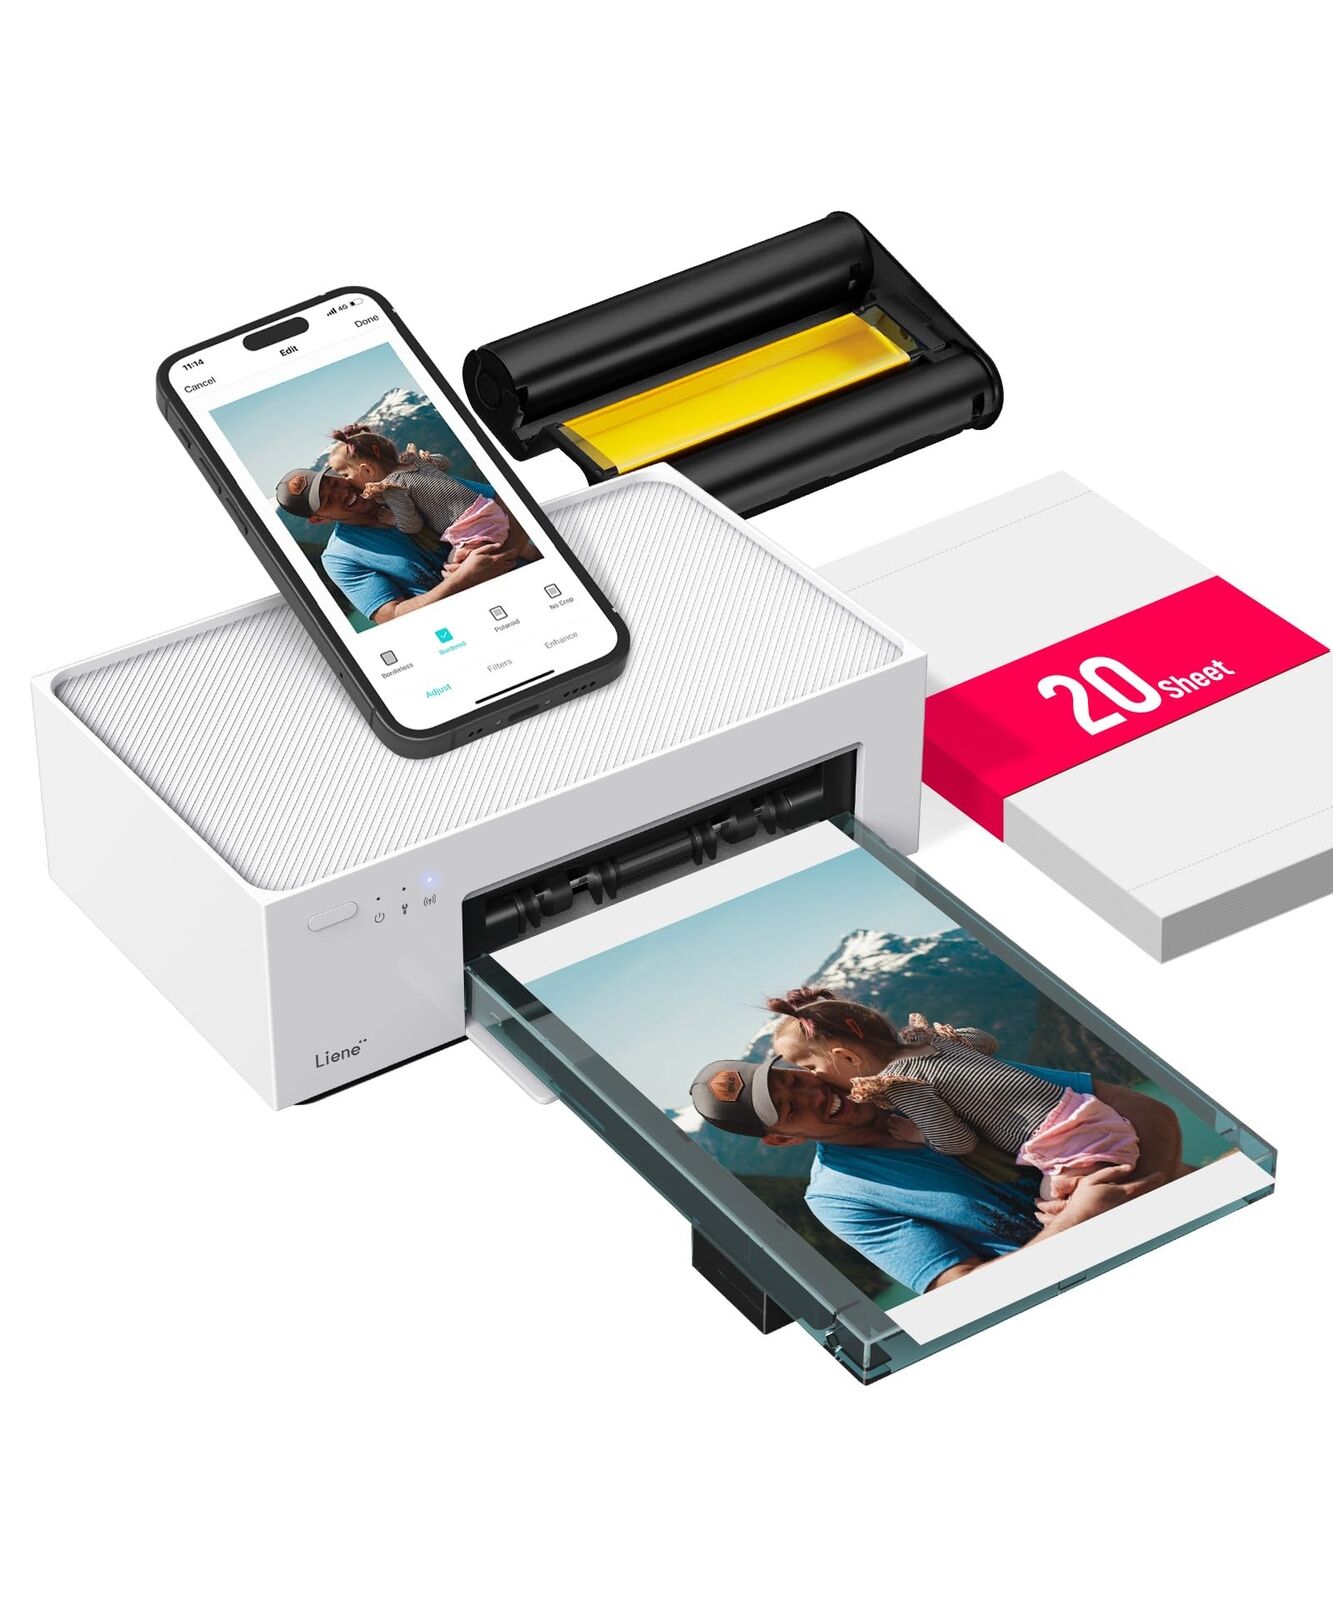 4x6'' Photo Printer, Wi-Fi, 20 Sheets, Full-Color, Instant Printer for iPhone...